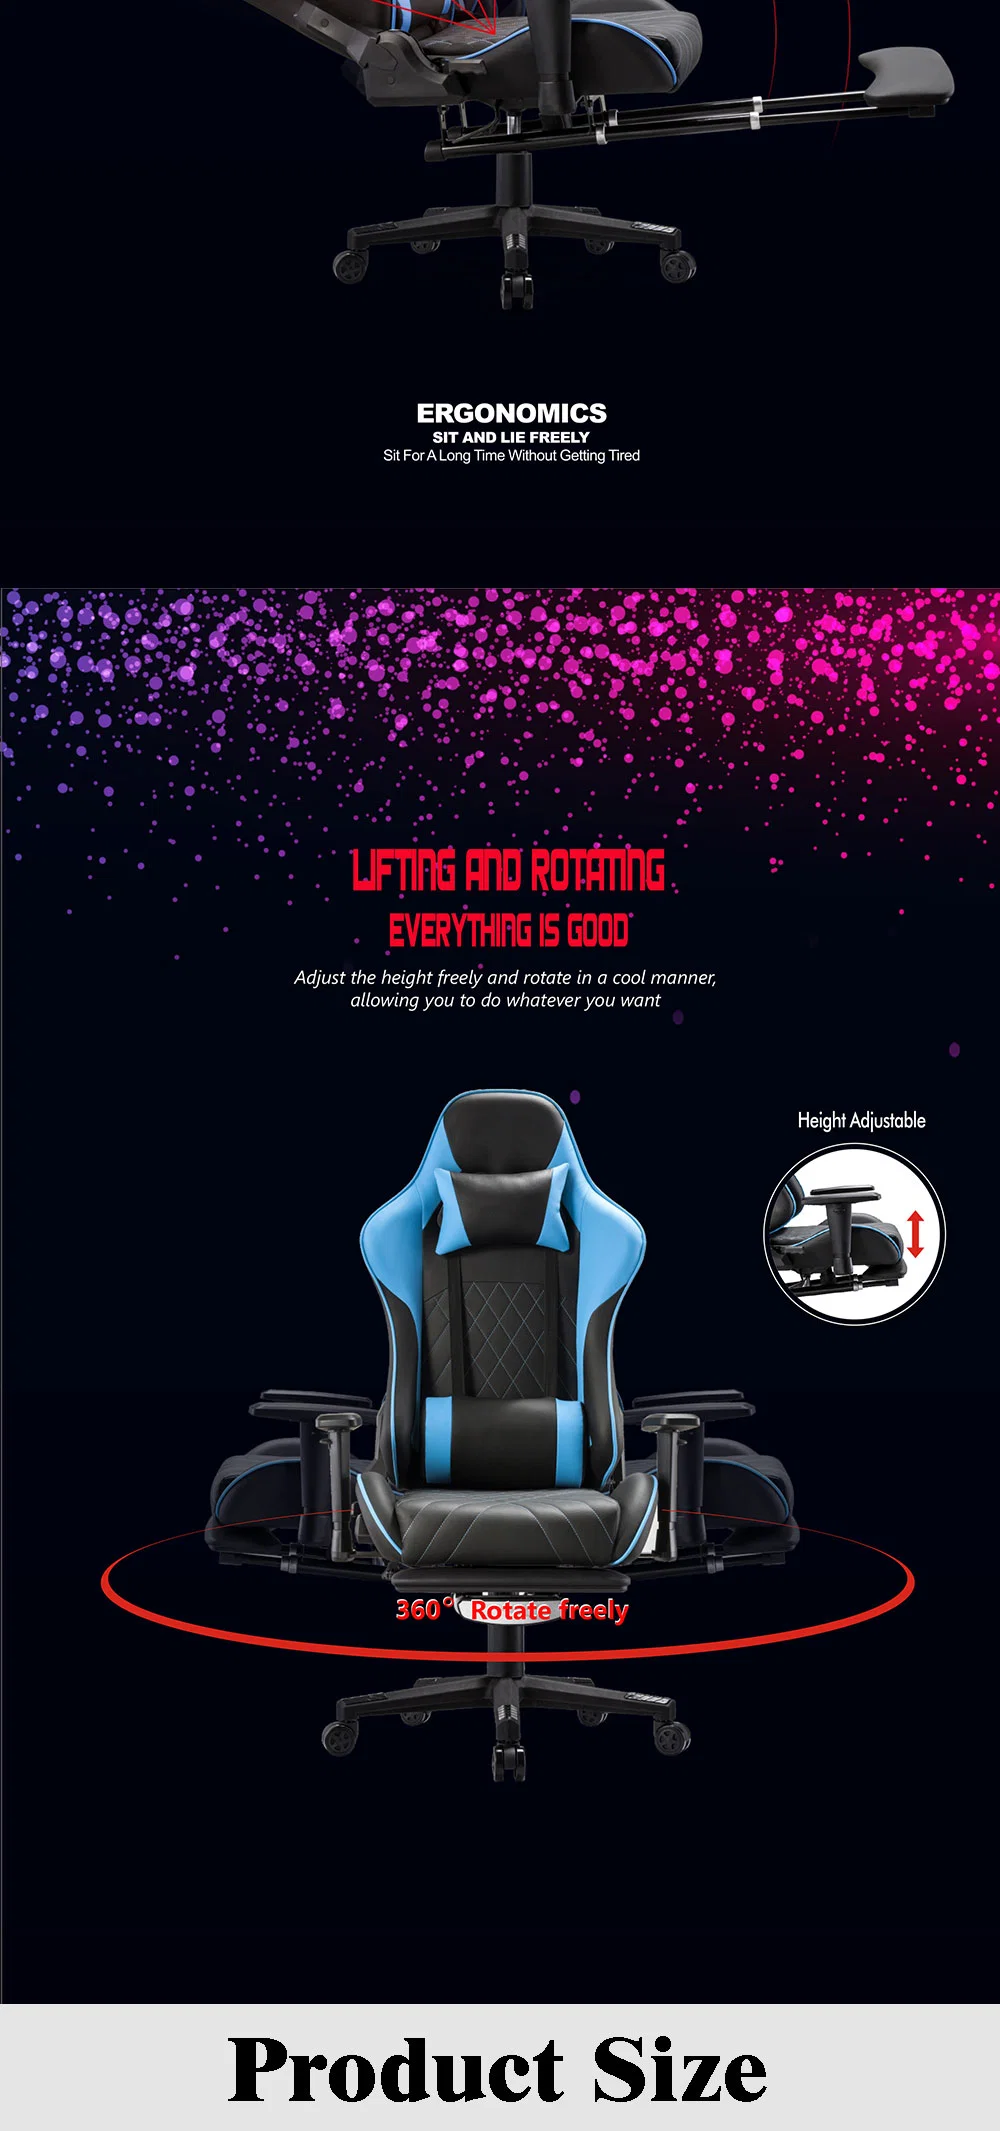 Popular Design New Series Computer Gaming Office Chair PC Gamer Racing Style Ergonomic Comfortable Leather Gaming Chair Racing Games Chair